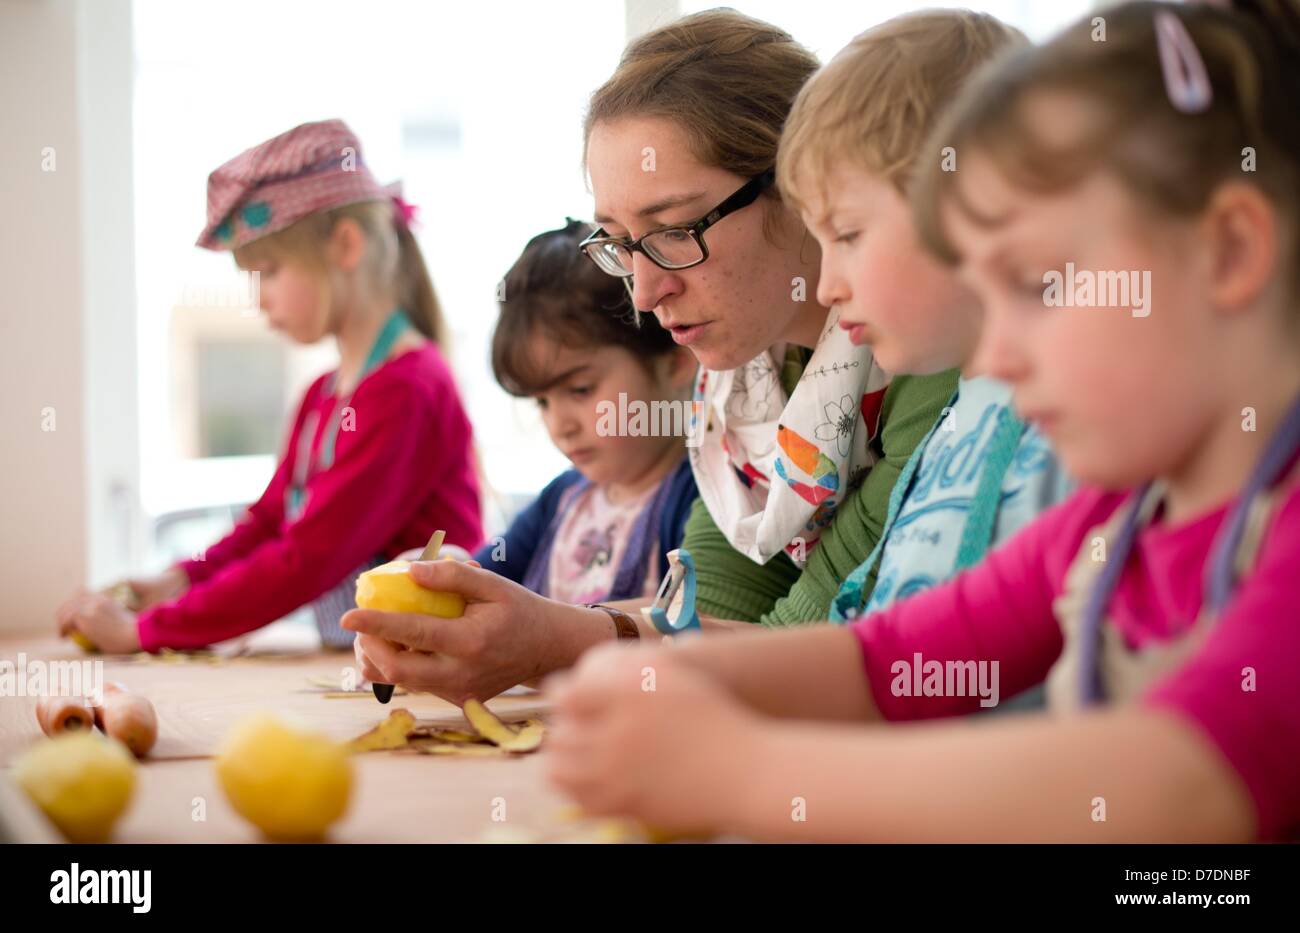 Simone Trockel cooks with Angelina (8, L-R), Elda (5), Alex (6) and Laurel (5) in the 'KinderKueche' in Hanover, Germany, 24 April 2013. Children cook their favorite dishes under the motto 'Self made meals are most tasty'.  Photo: Julian Stratenschulte Stock Photo